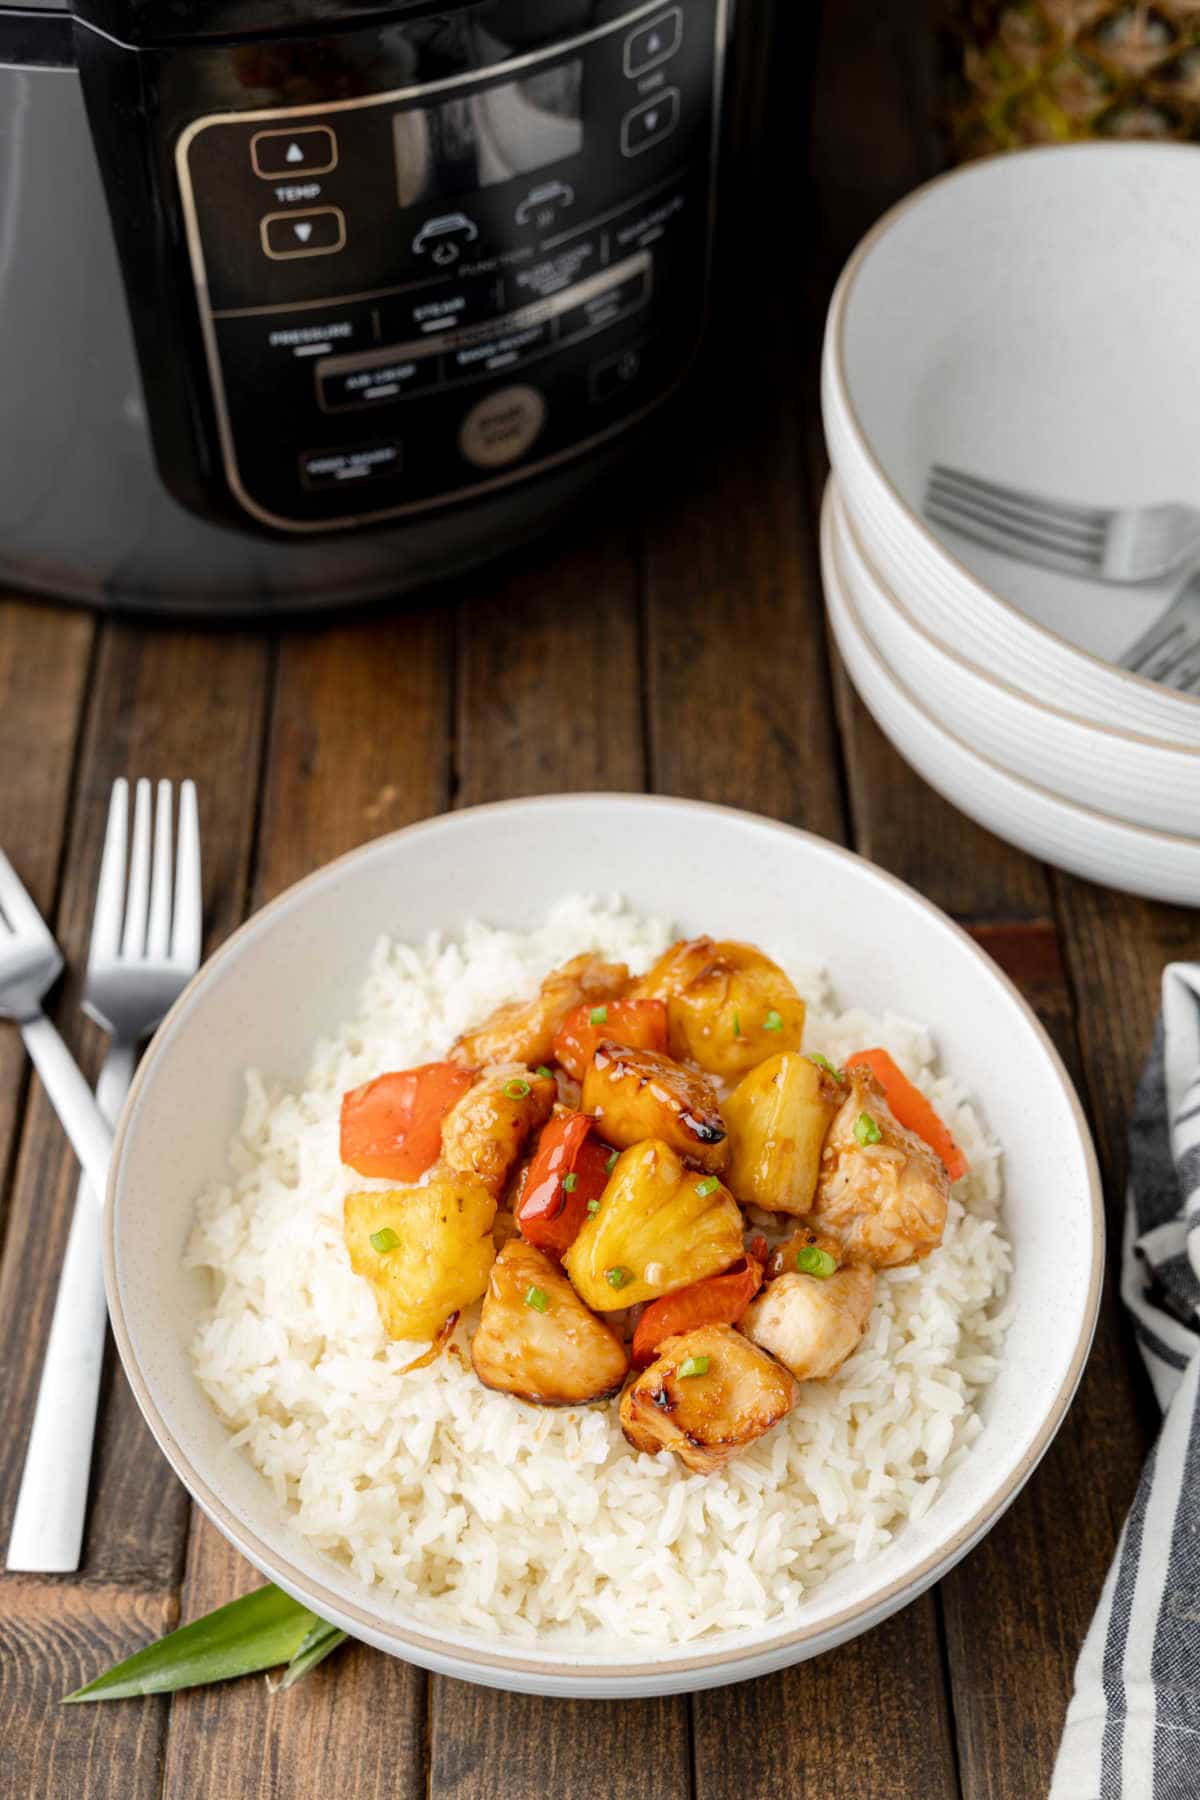 Pineapple chicken on a bed of rice in a bowl.